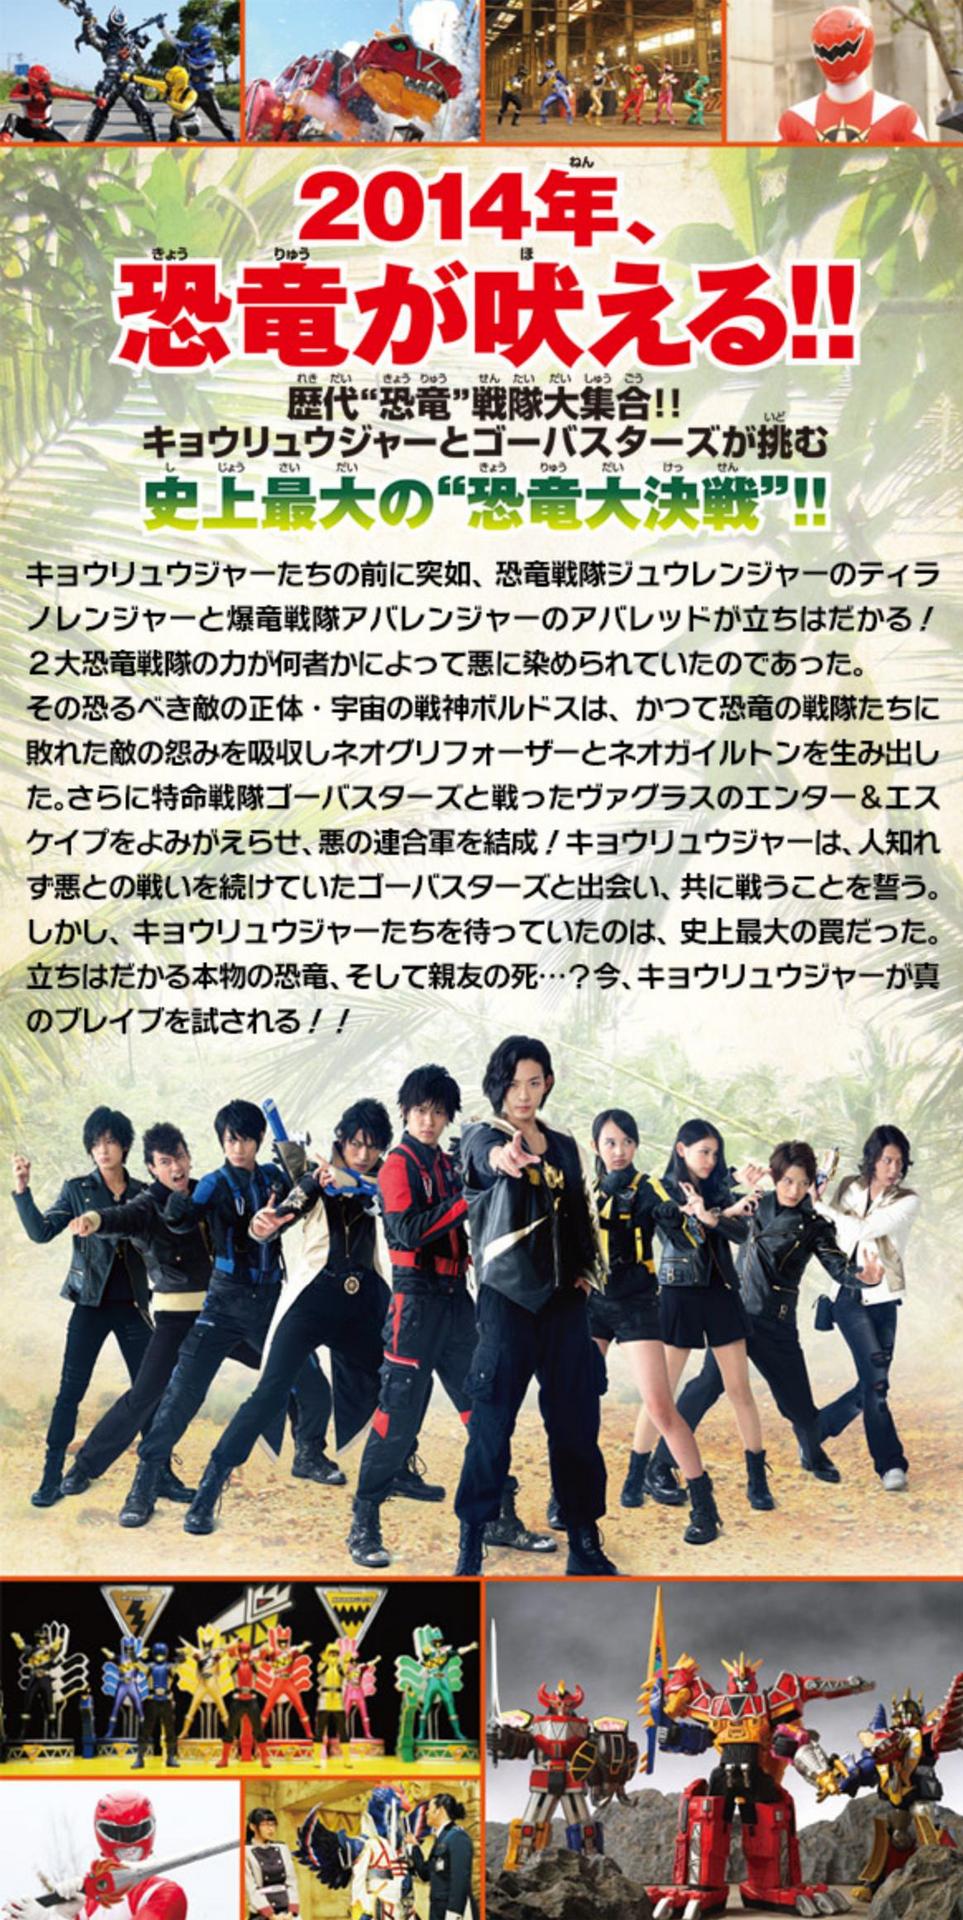 Kyoryuger Vs. Go-Busters Flyer Images & Information - Tokunation